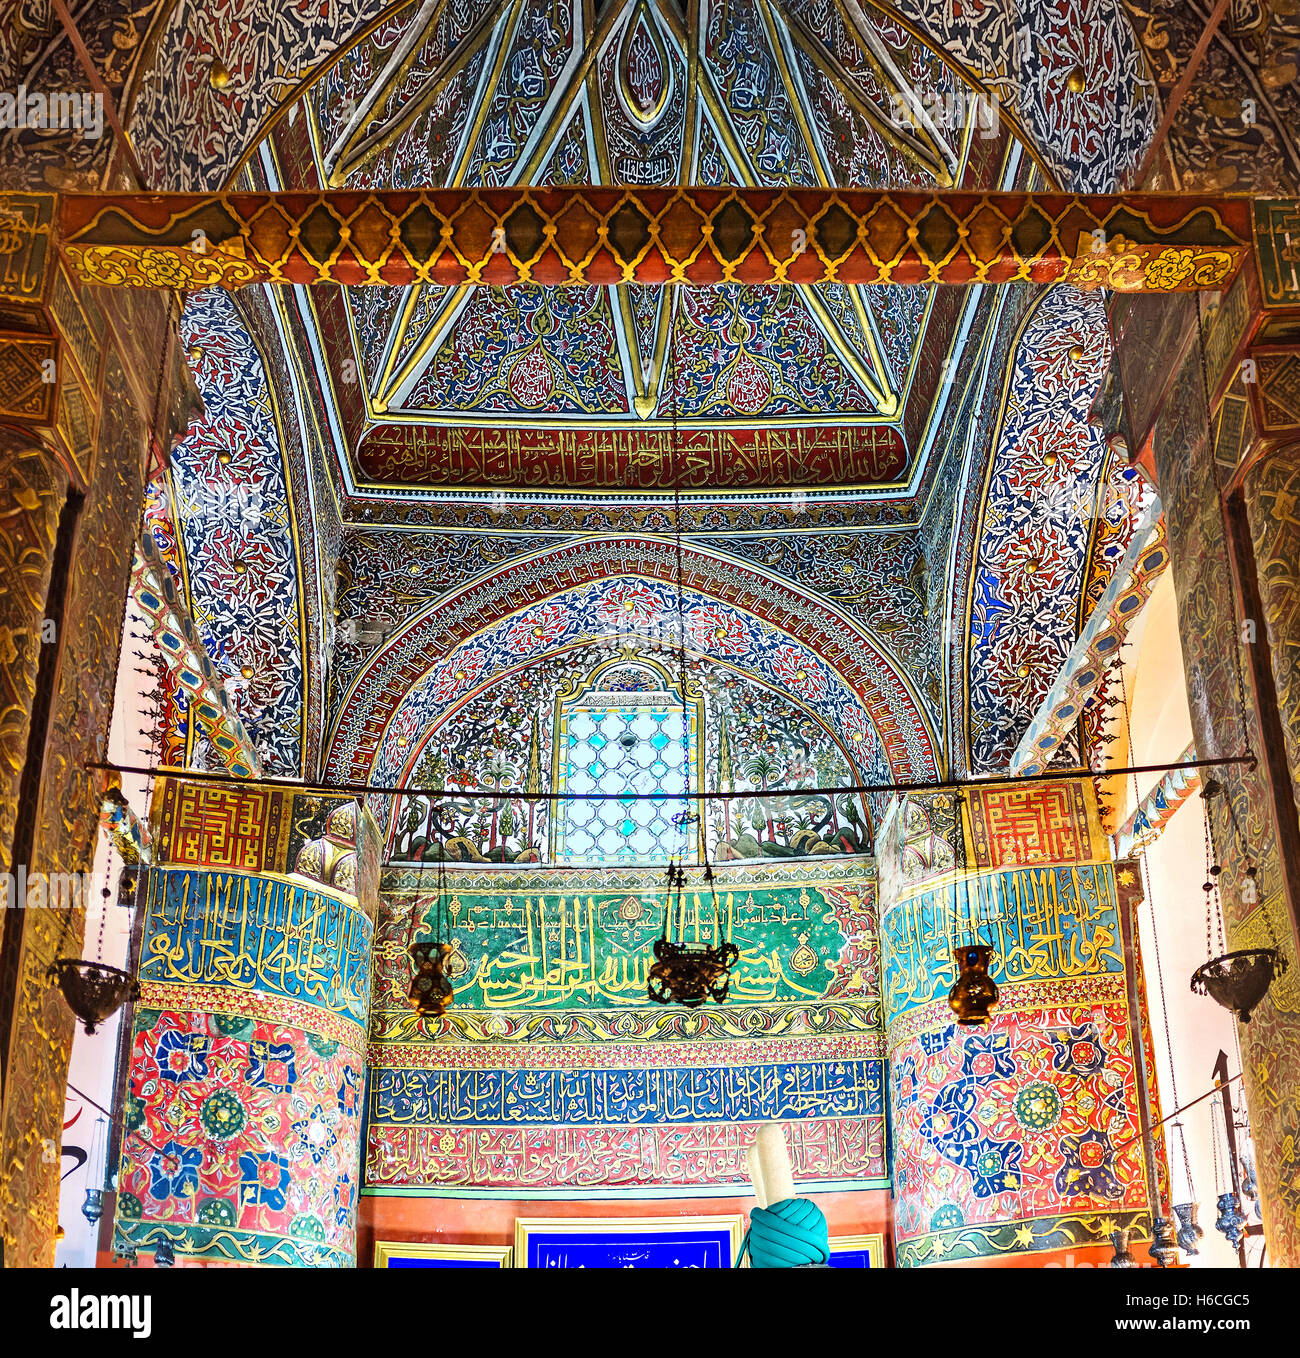 The interior of the burial chamber in Mevlana Mausoleum, that boasts colorful islamic ornamentations with old arabic calligraphy Stock Photo